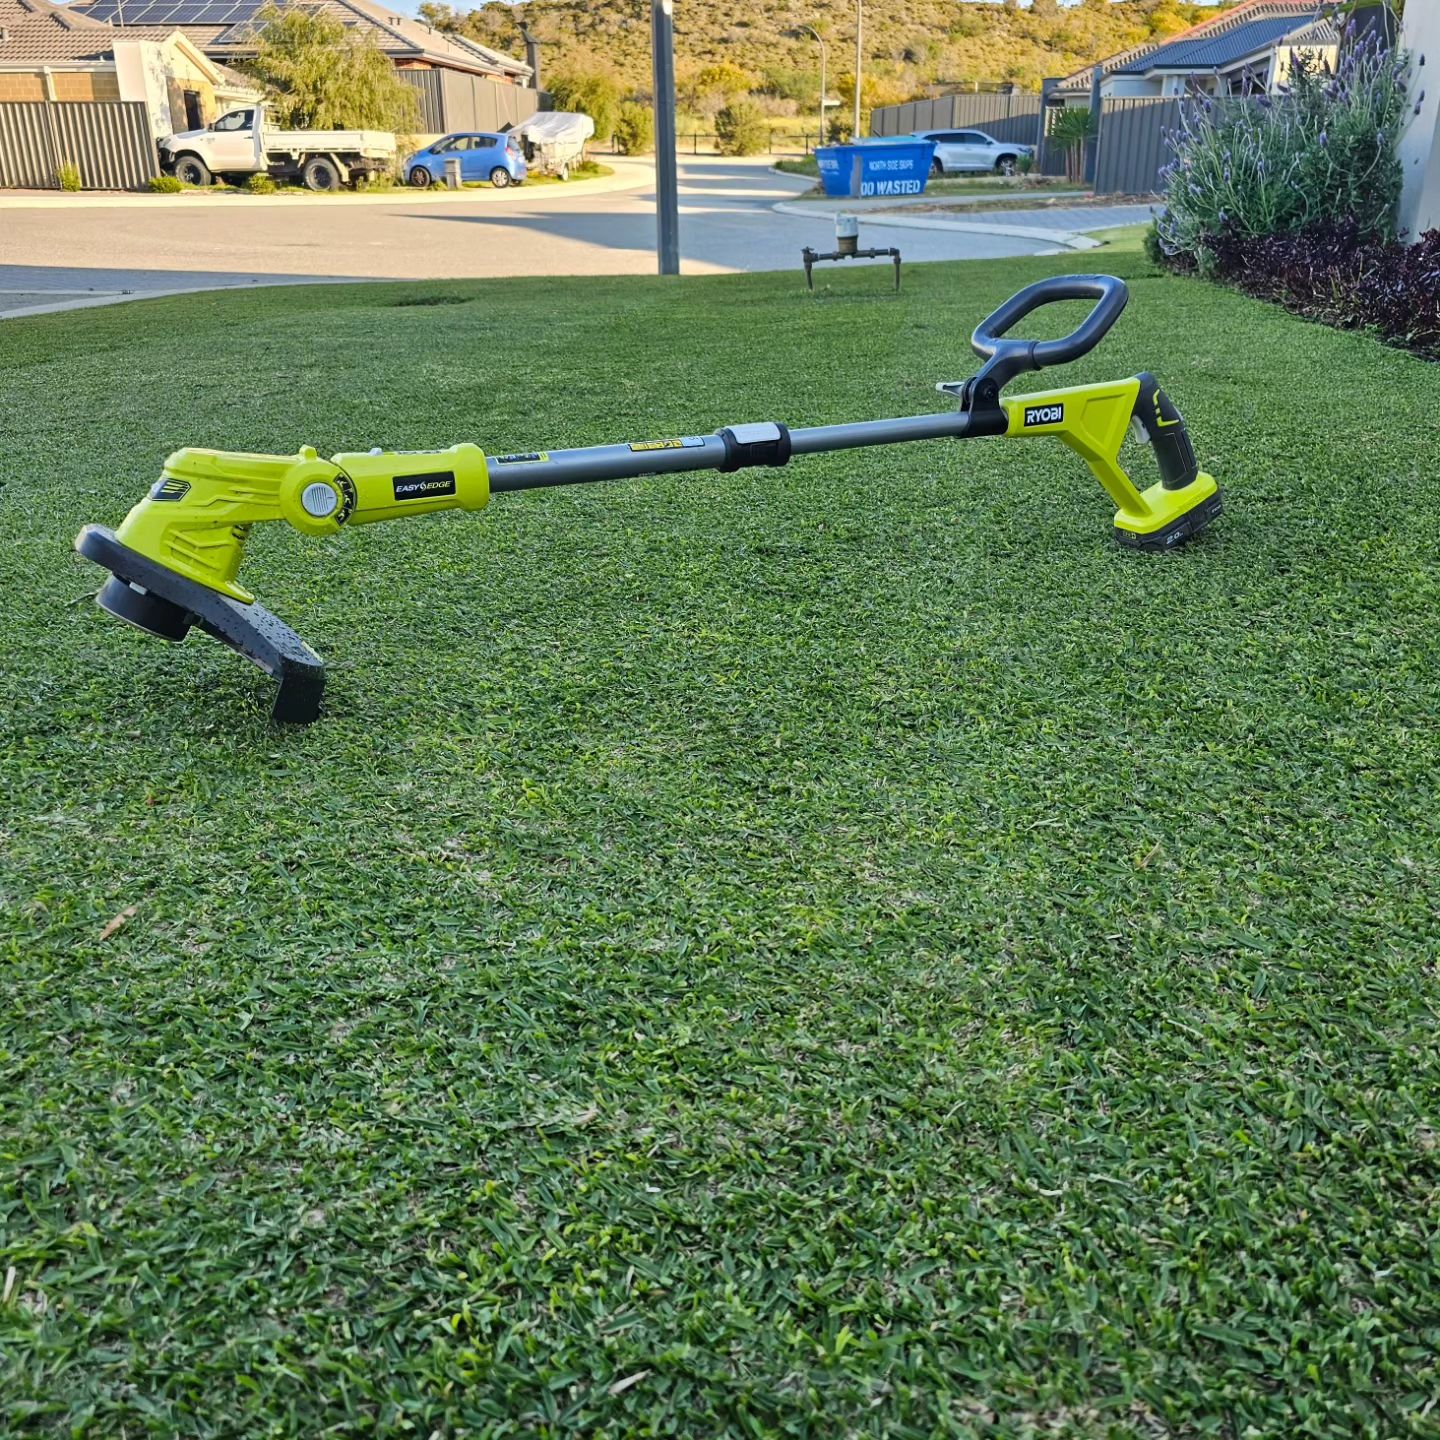 I have added to my ryobiau collection with this battery powered whipper snipper to make those quick tidy ups a lot simpler and easier around the garden, after a quick test run I'm very happy with my purchase from bunnings

#ryobi #ryobiau #ryobination #ryobimade #bunnings #bunningsdad #perthbackyards #perthgardening #perthlandscaping #perthlawns #perthgardens #perthhomes #perthlawncare #sirwalterbuffalo #buffalolawn #walandscapes #landscapeswa #landscapedesignperth #walawnaddicts #walawnlegends #australianlawnfanatics #baileysfertilisers #lawnporn #baileysgrowgardens #lawnstripes